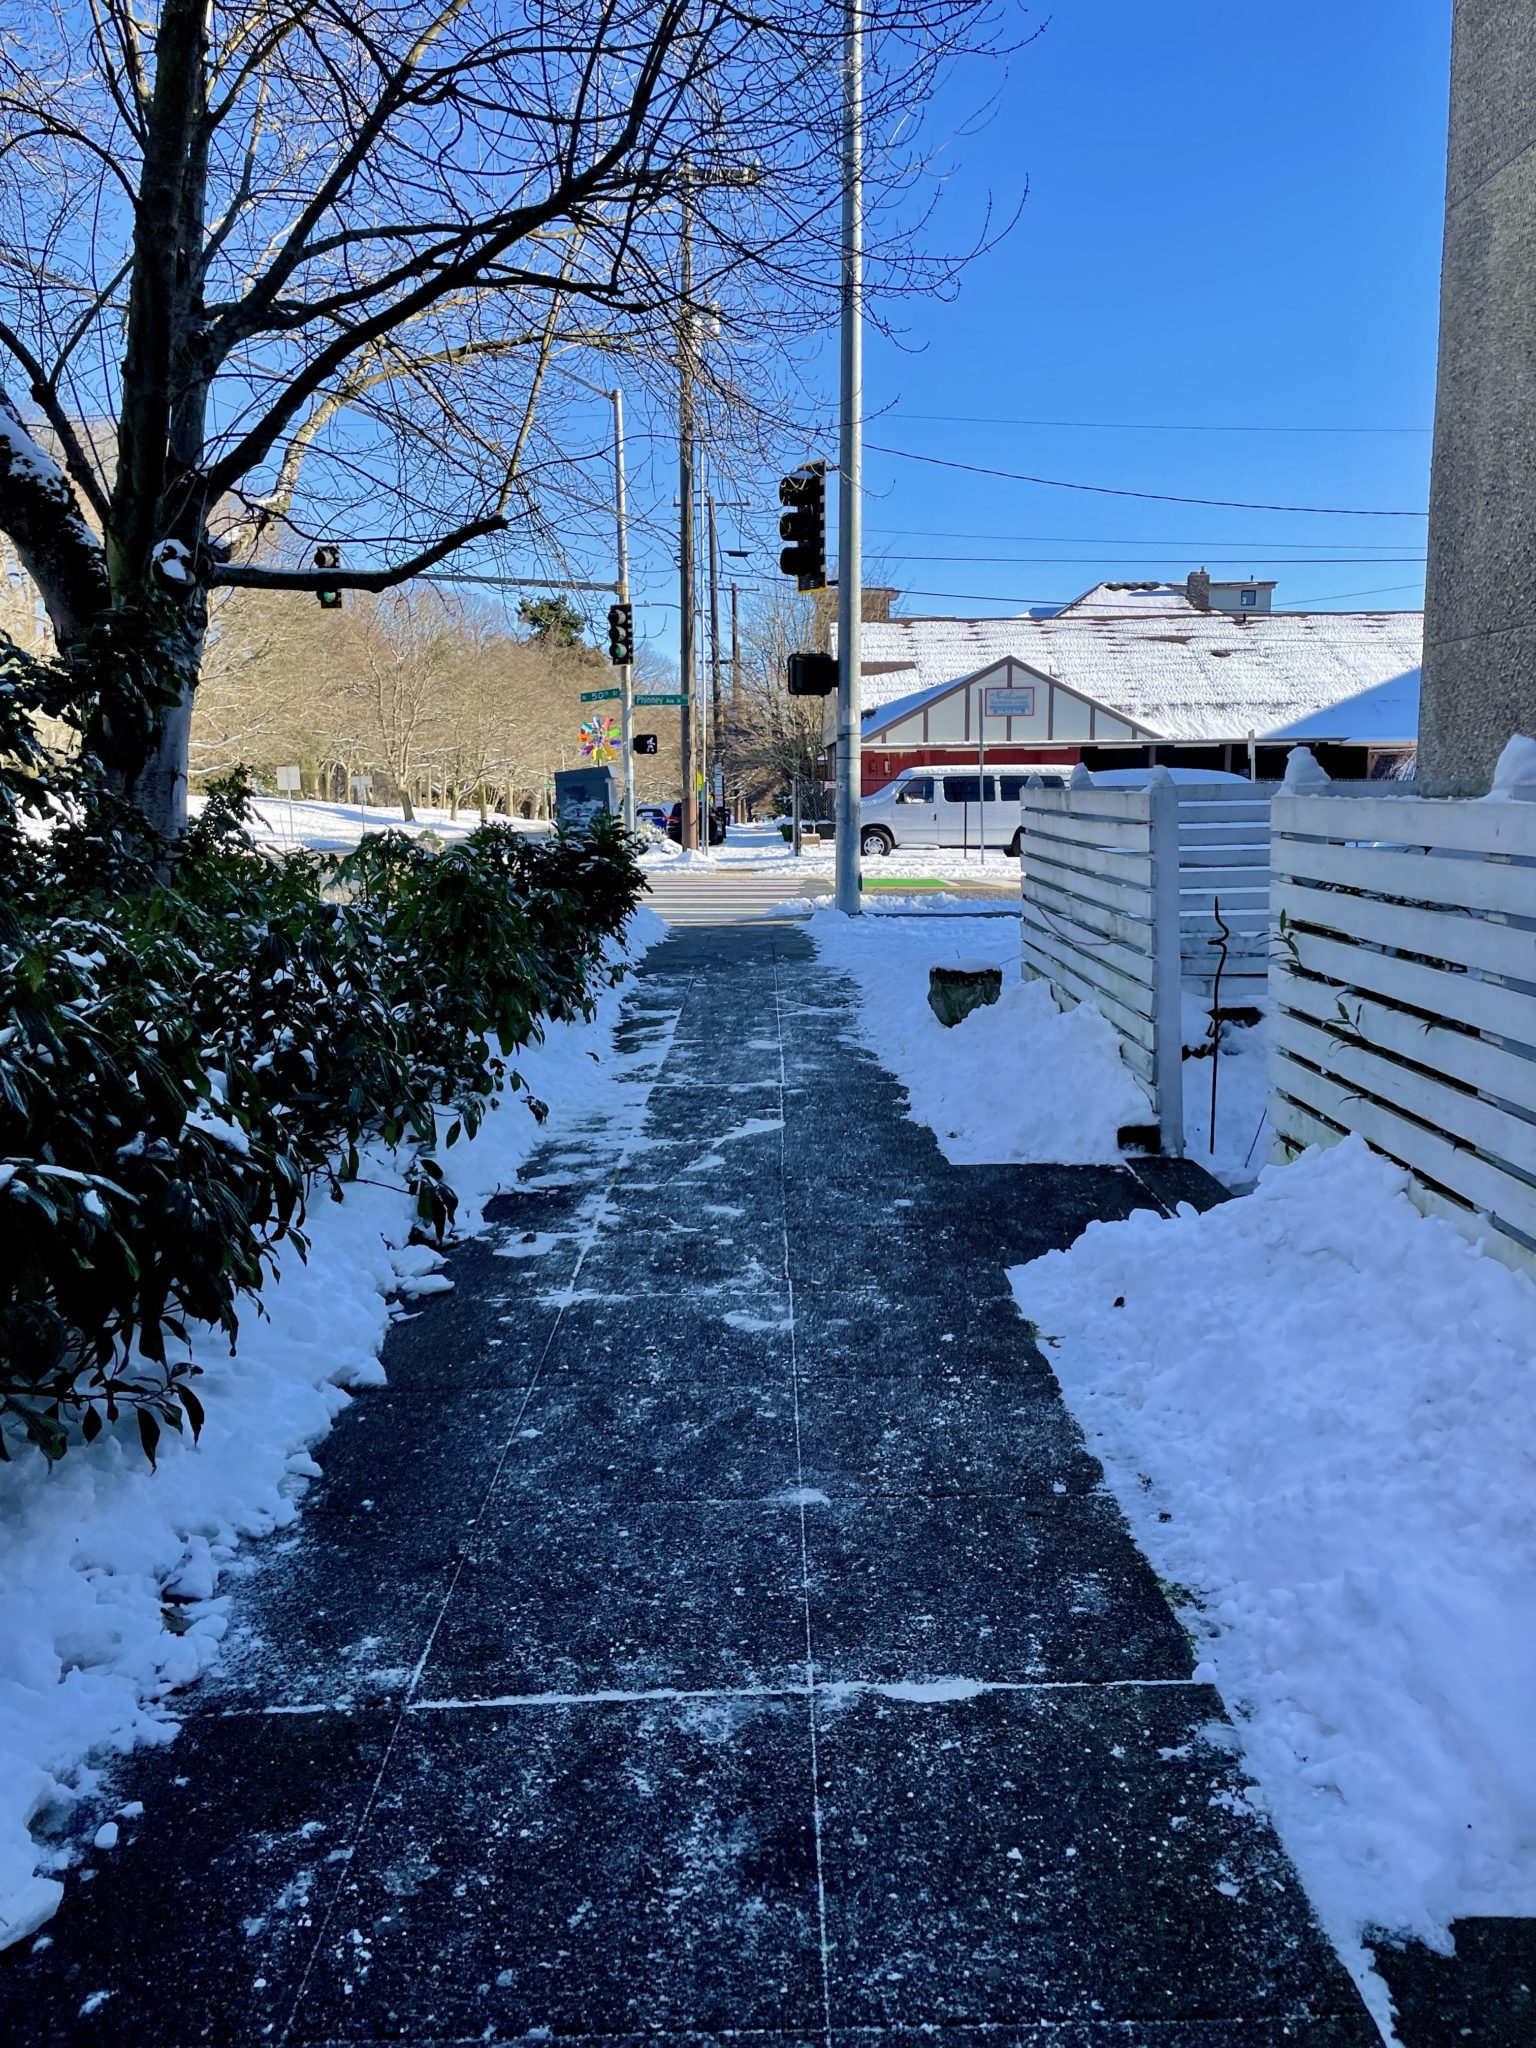 This image shows a sidewalk in north Seattle that had recently been shoveled, creating a clear path for people walking, rolling, and biking in the area. Snow is visible on the ground nearby, as well as clear, blue skies above.